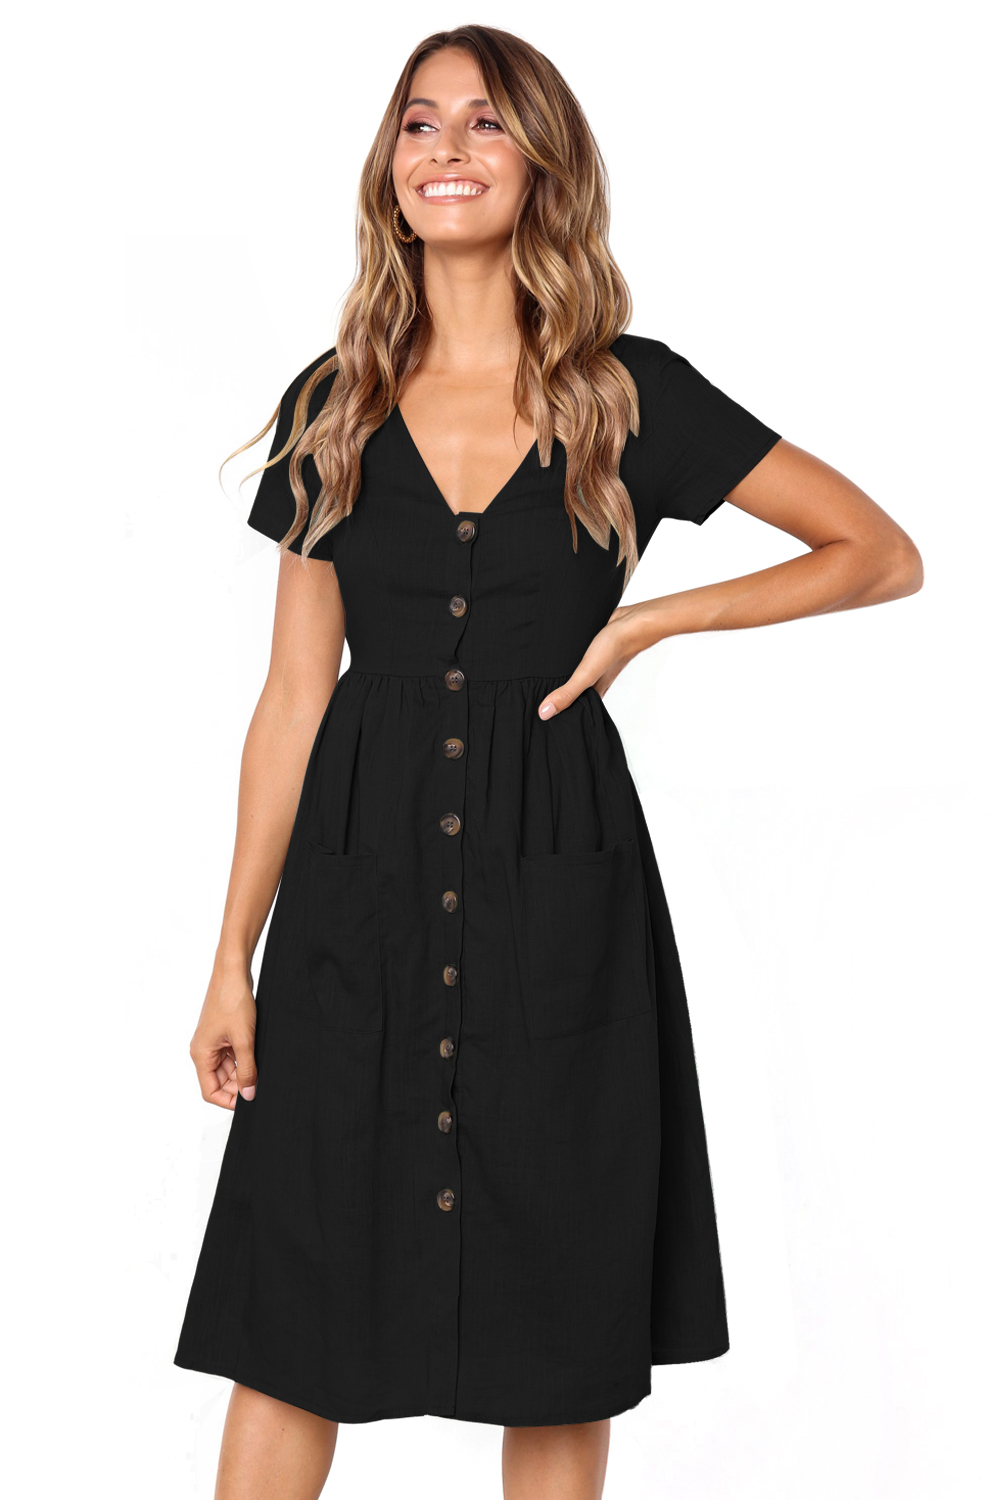 US$ 10.33 Drop-shipping Black Stylish Button Front Midi Dress with ...